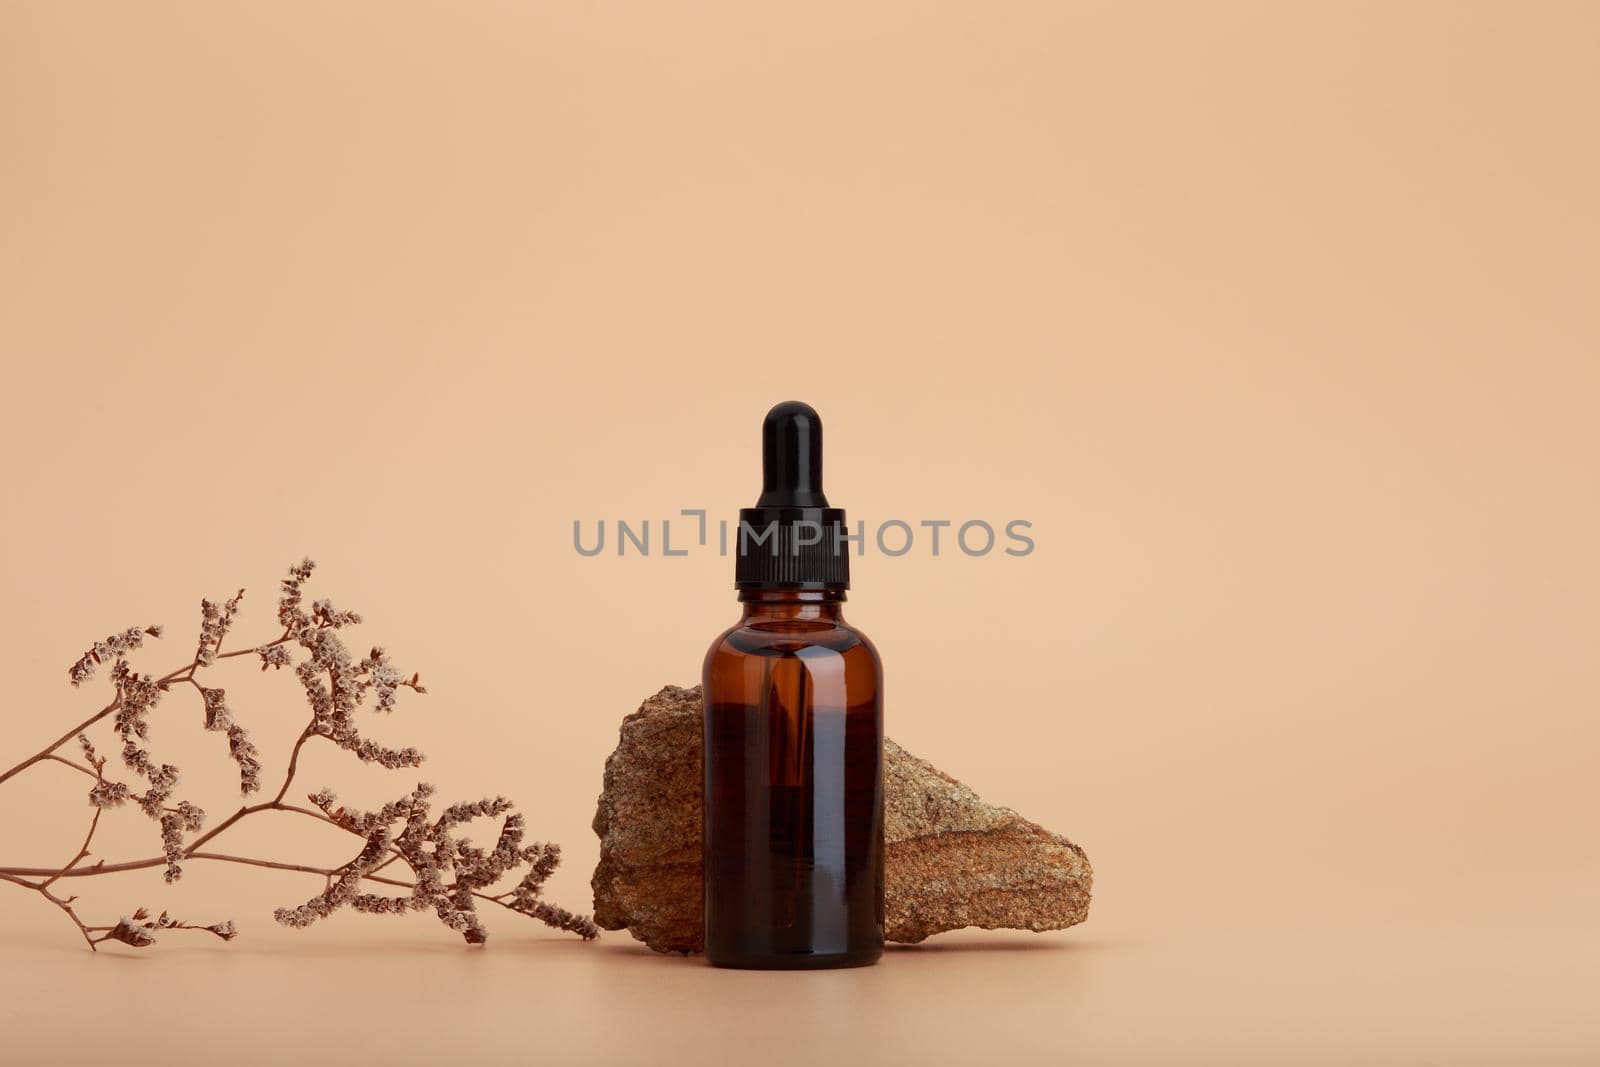 Skin serum bottle next to natural stone and dry flower against beige background with copy space by Senorina_Irina